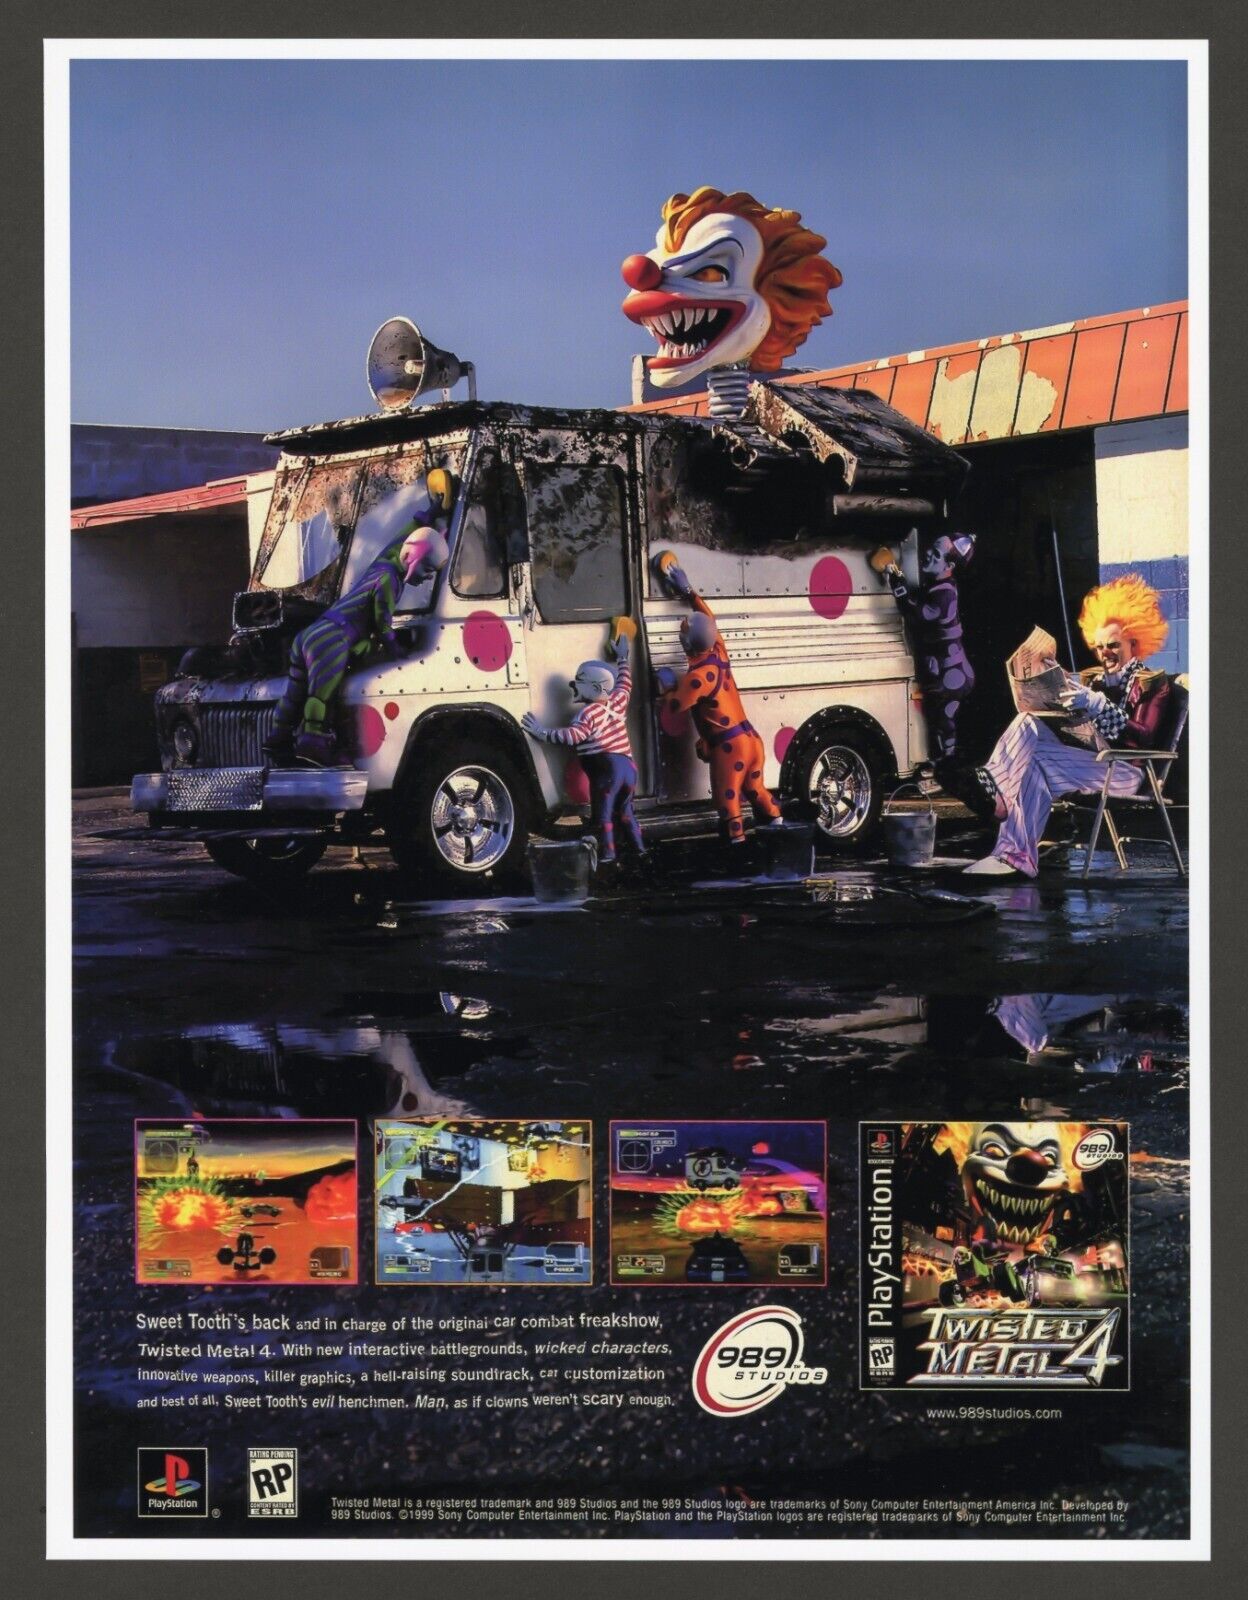 Twisted Metal 4 Playstation 1 PS1 1999 Promo Ad Art Print Glossy Wall Poster